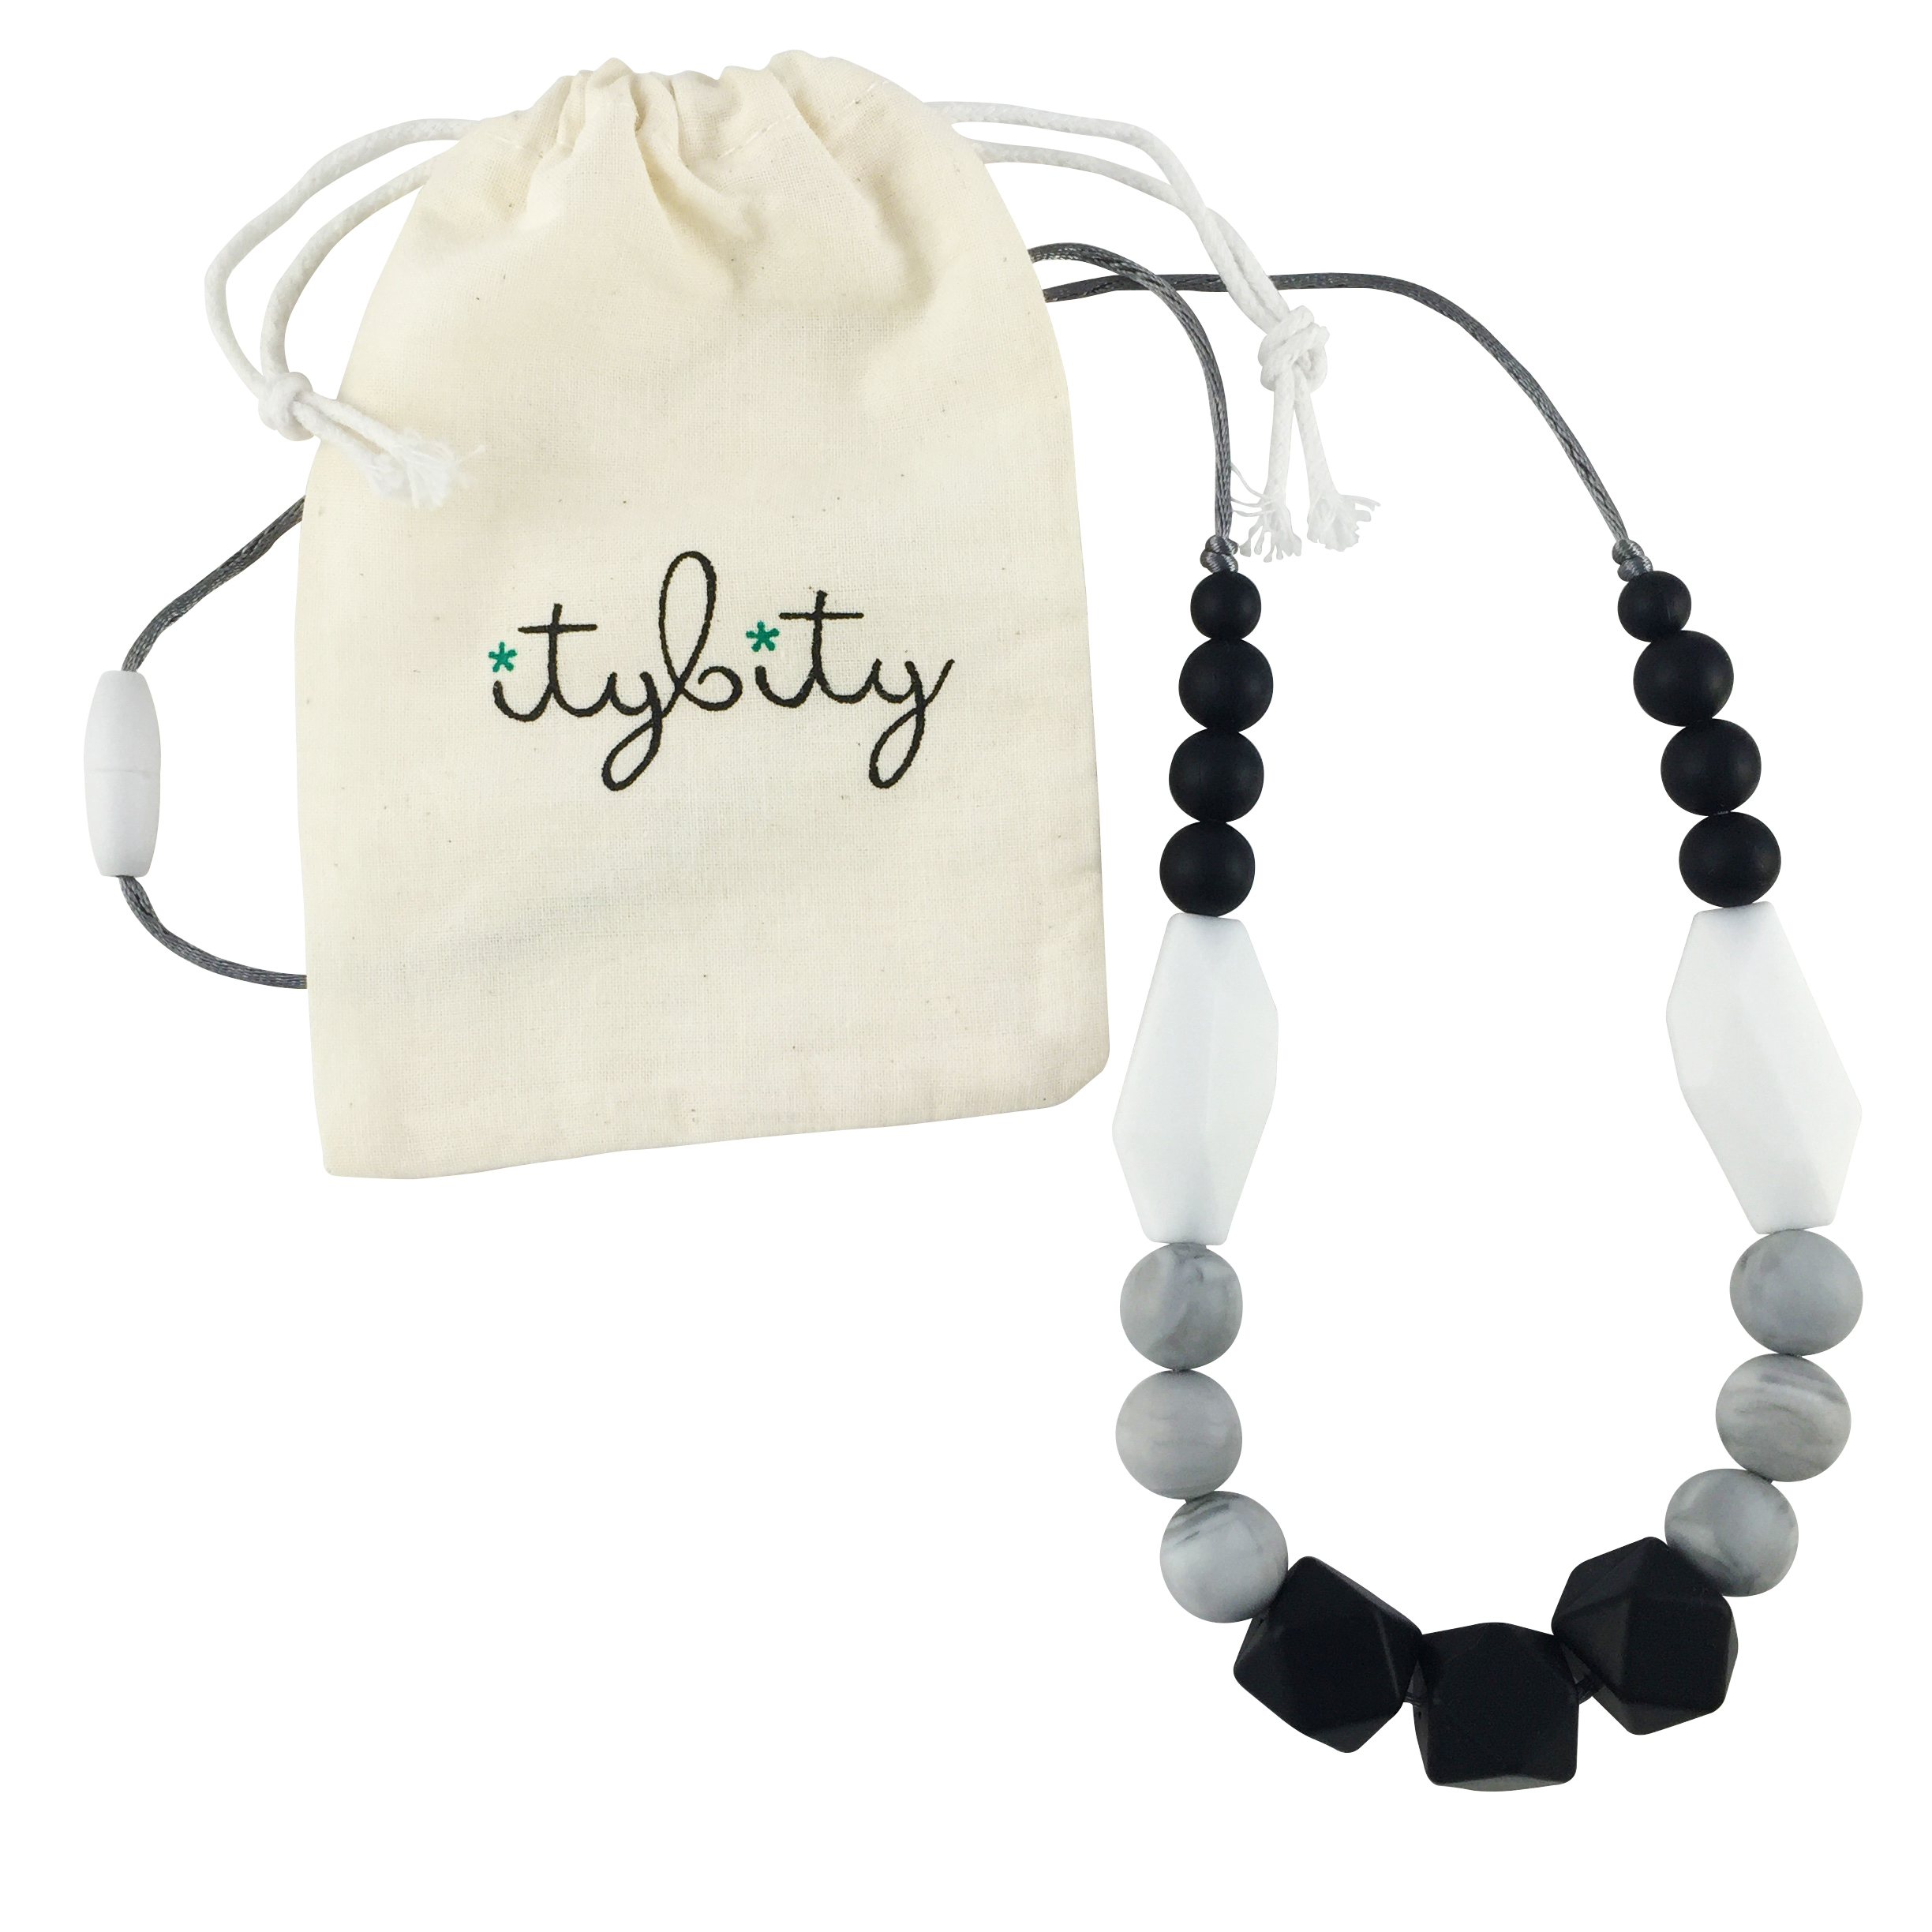 Baby Teething Necklace for Mom, Silicone Teething Beads, 100% BPA Free (Black, White, Gray, Black) - image 1 of 3